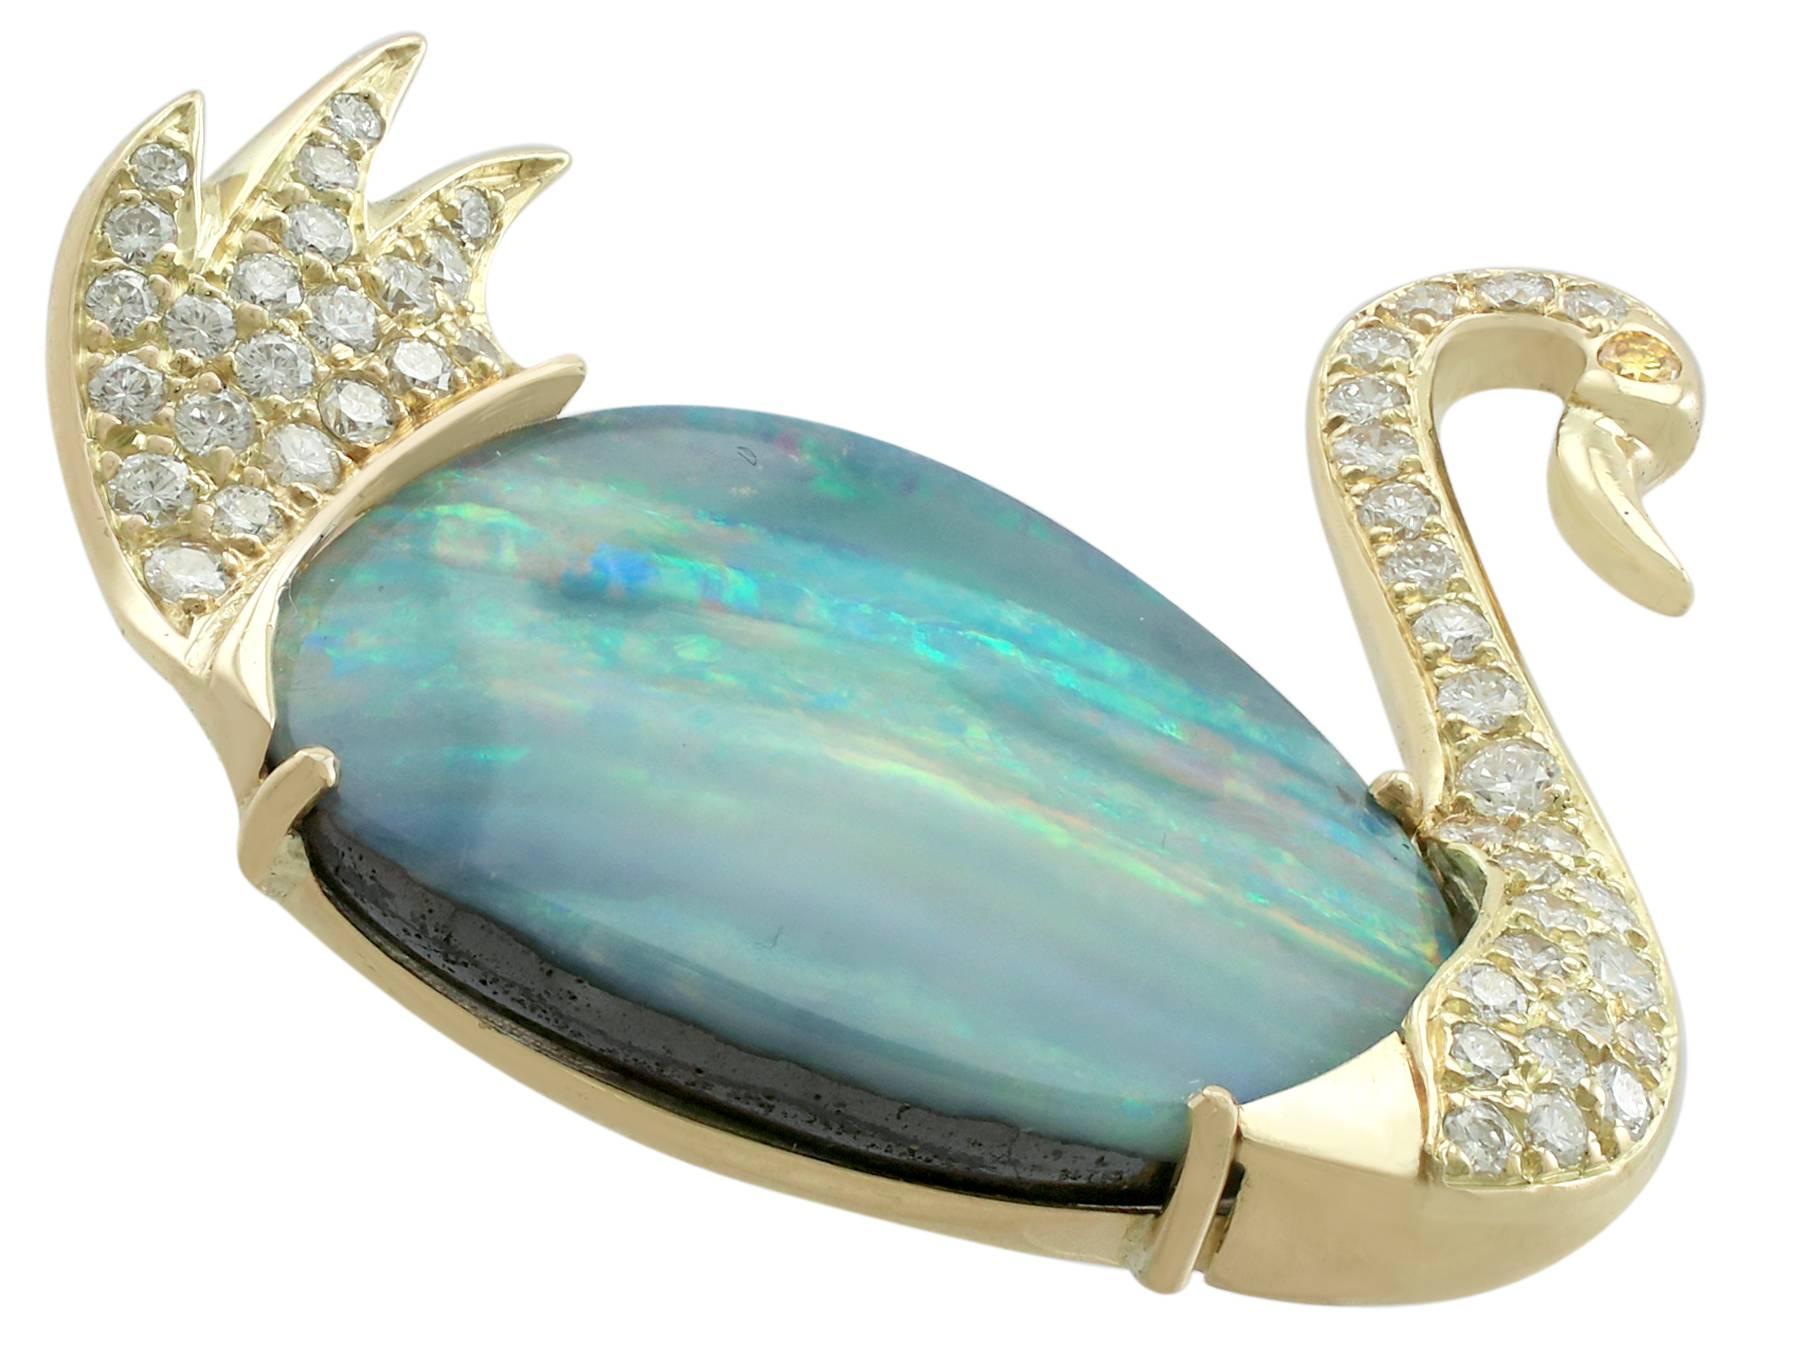 An impressive vintage 13.79 carat opal doublet and 1.15 carat diamond, 18 carat yellow gold 'swan' brooch; part of our diverse vintage jewellery collections.

This fine and impressive vintage swan brooch has ben crafted in 18k yellow gold.

The